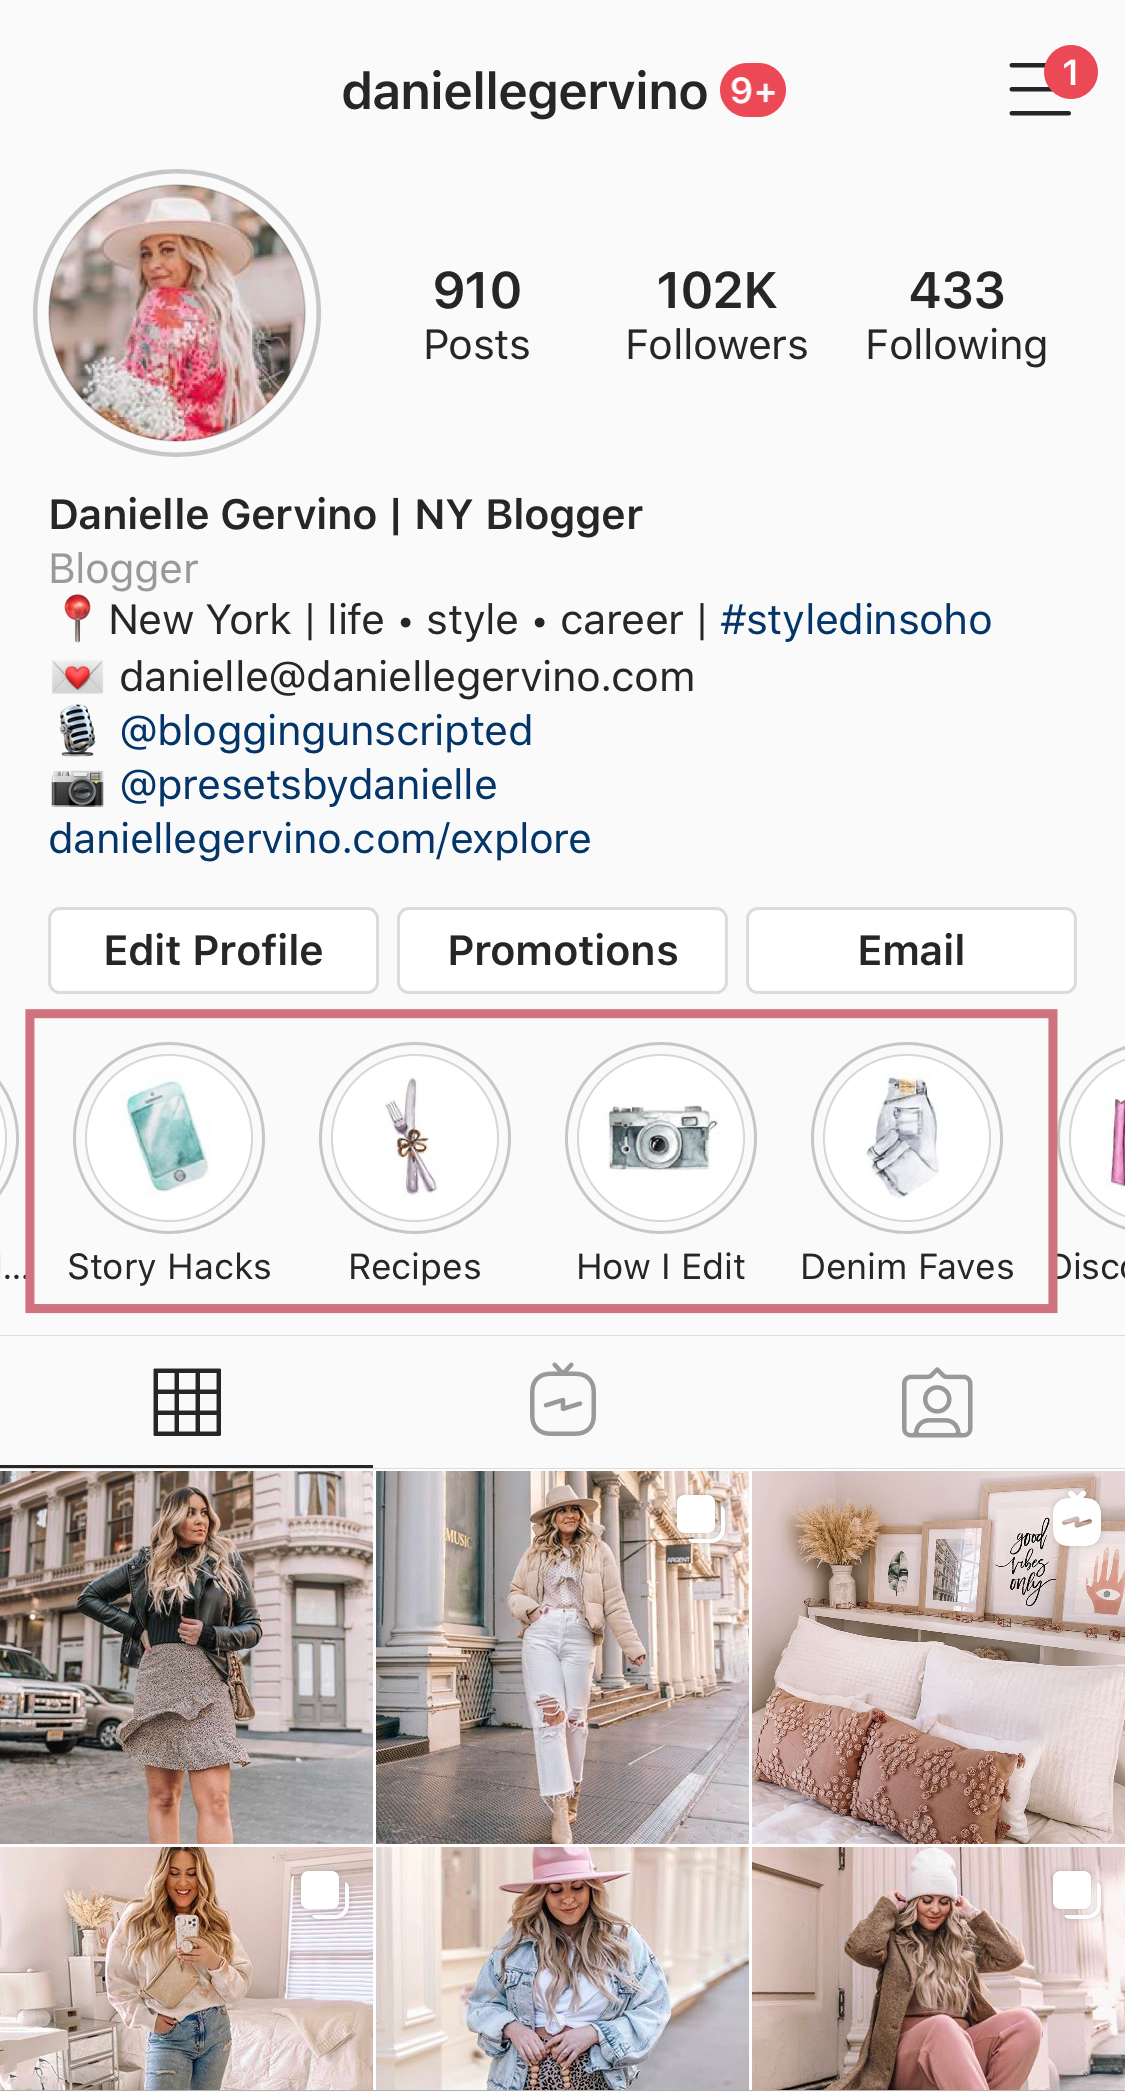 How to Leverage Instagram Stories to Grow Your Brand | Danielle Gervino